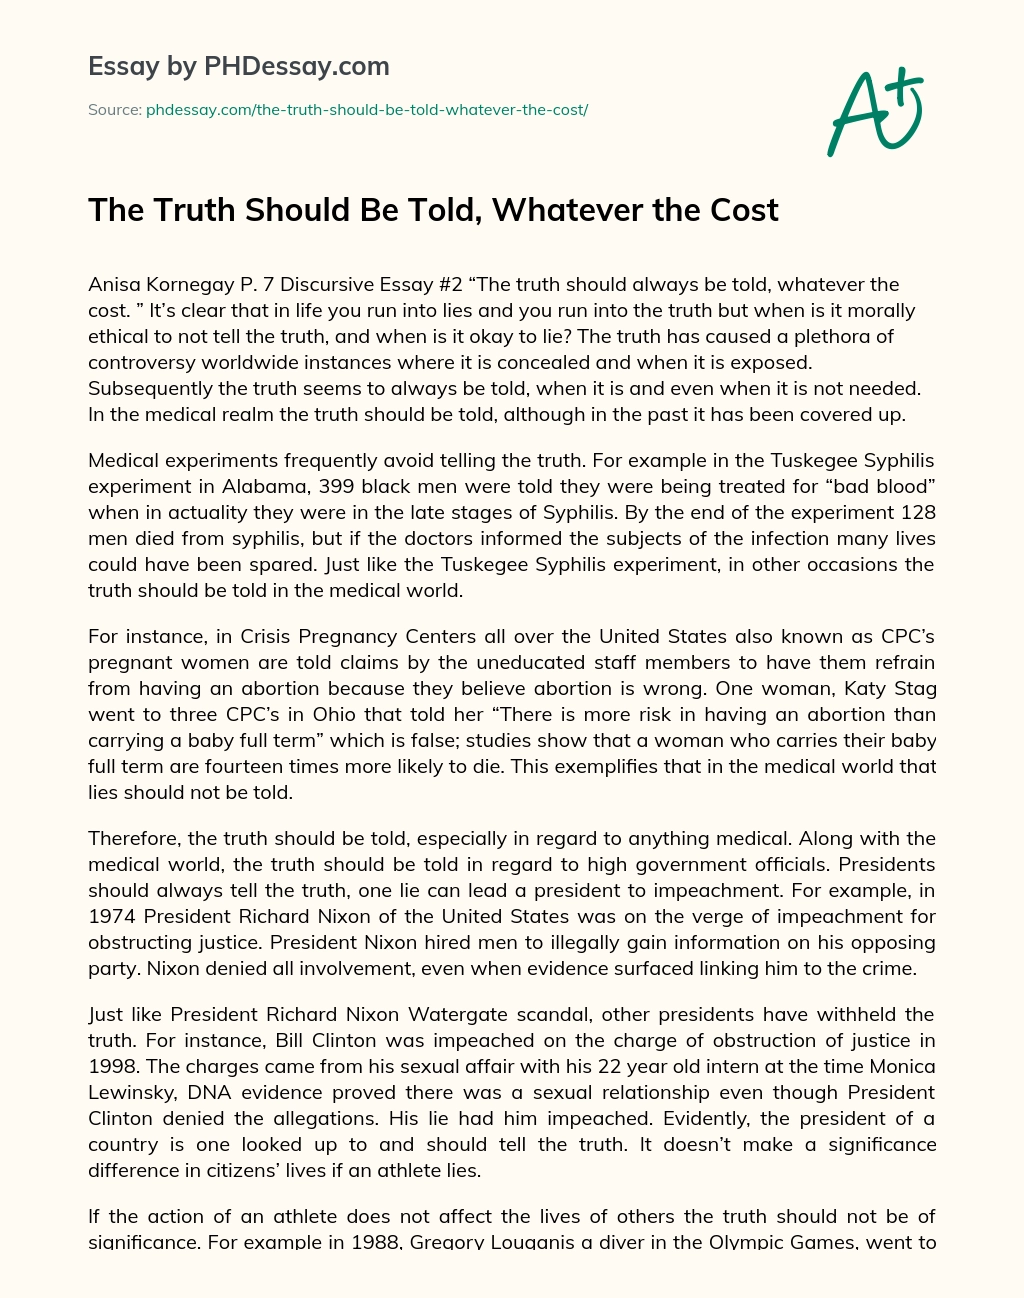 The Truth Should Be Told, Whatever the Cost essay